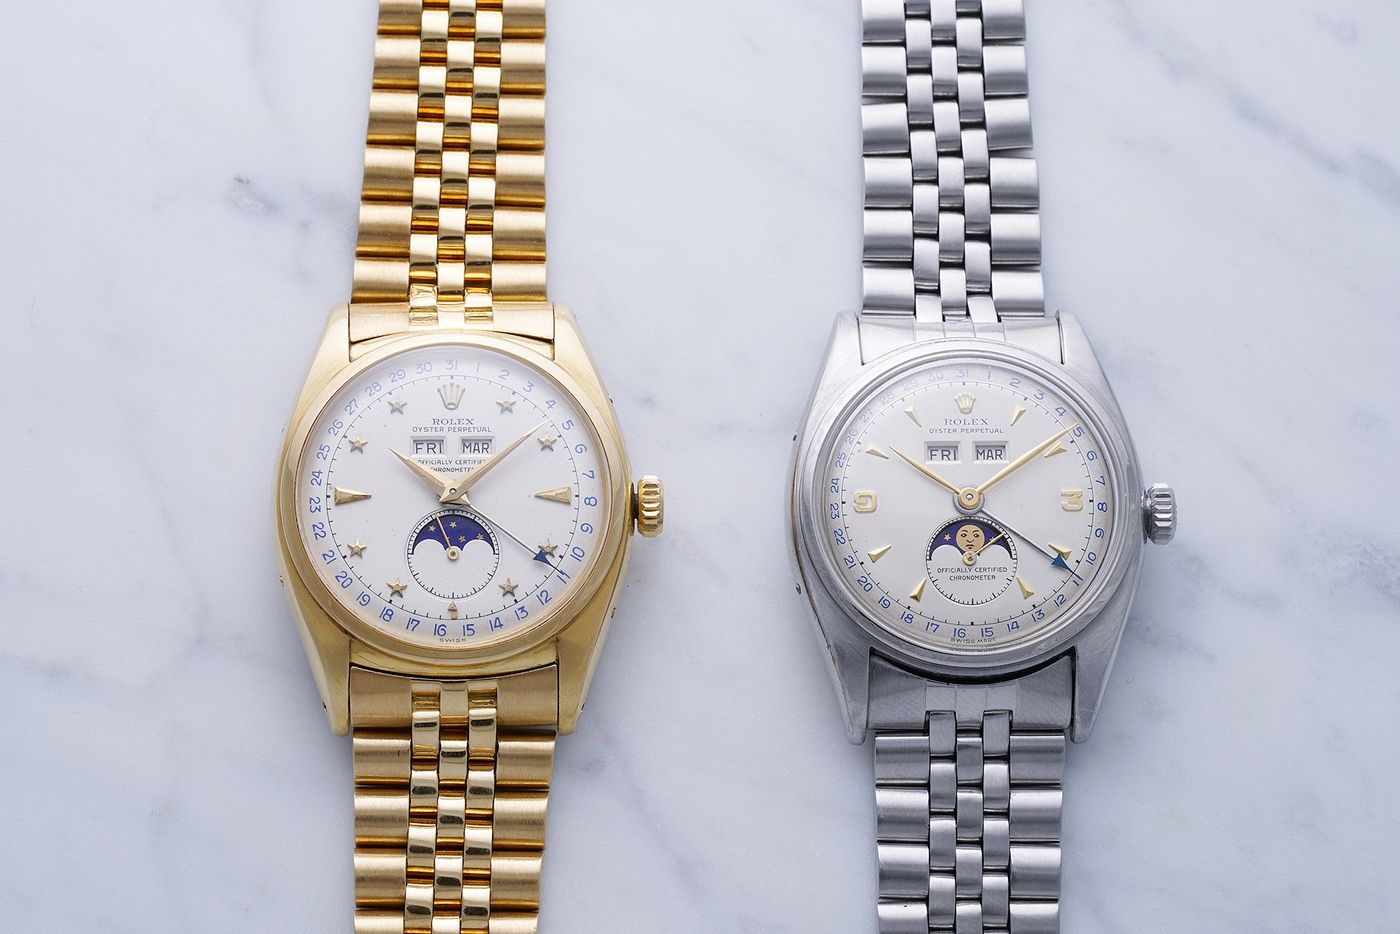 phillips two very different rolex reference 6062 watches united at last two very different rolex reference 6062